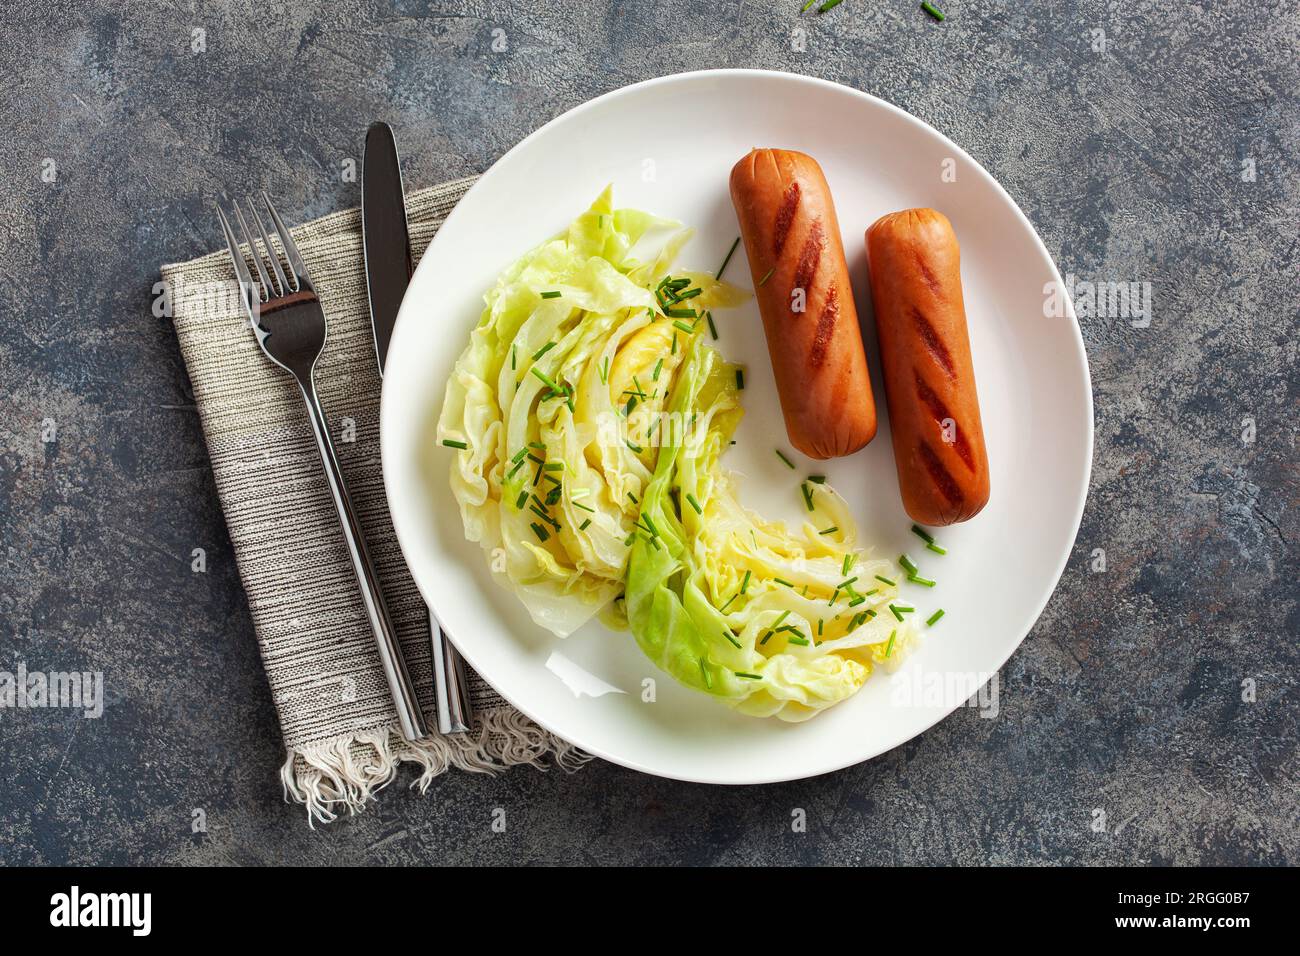 grilled sausages and stewed steamed cabbage with butter, healthy keto meal Stock Photo